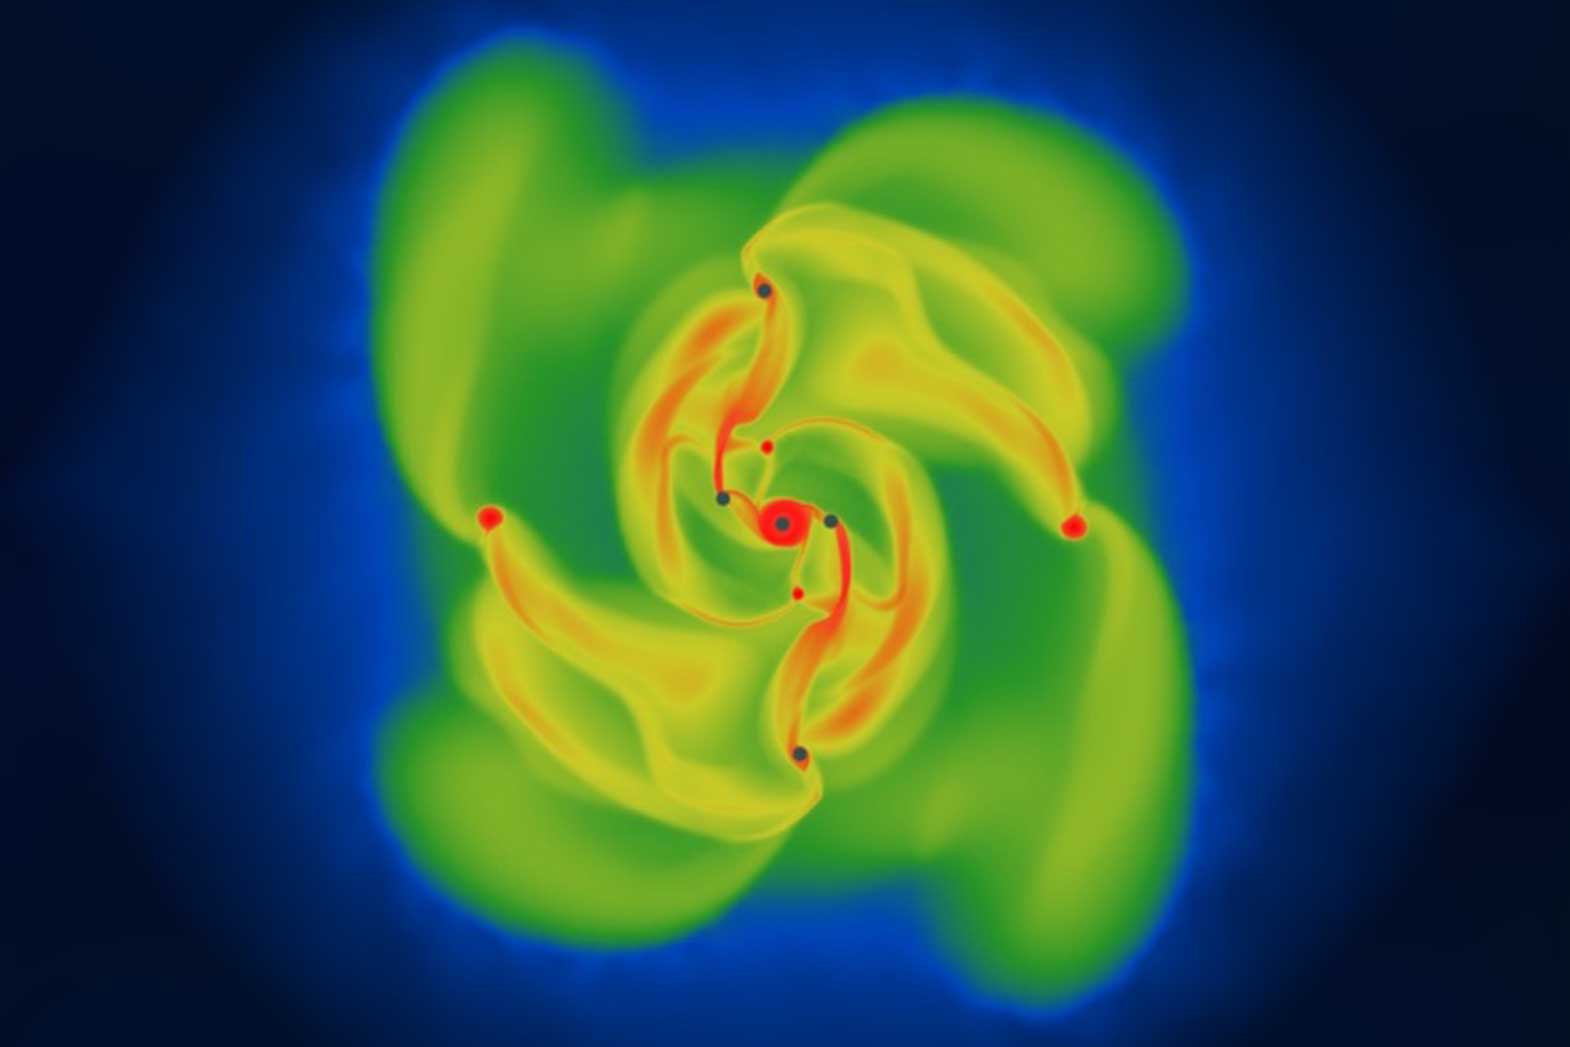 planets forming in a protostellar disc